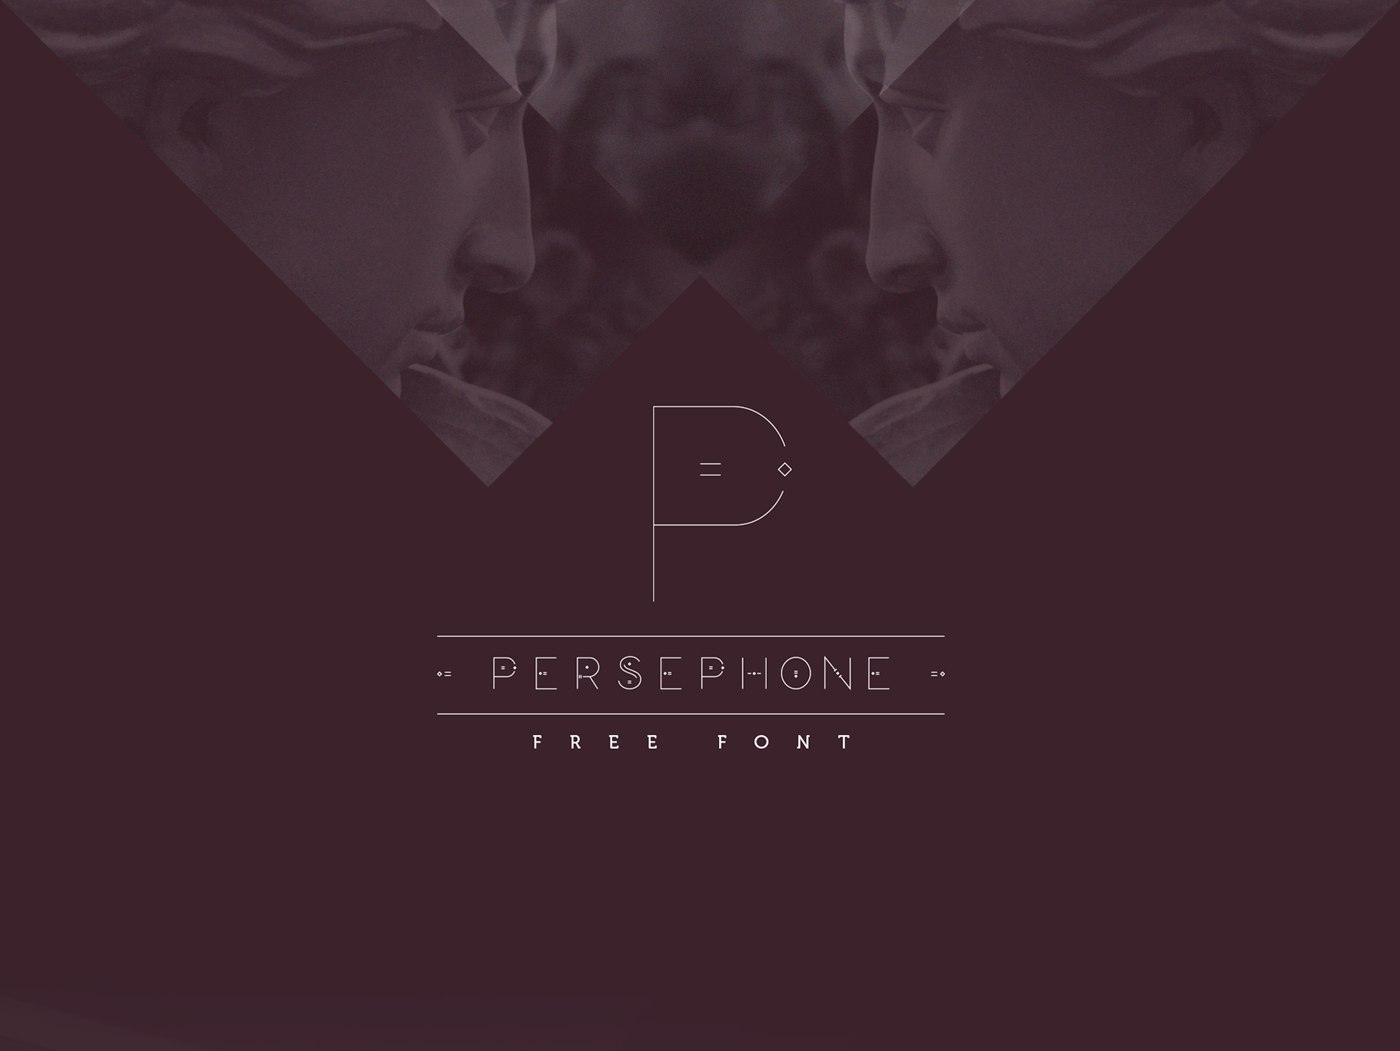 Example font Persephone & Hades #1